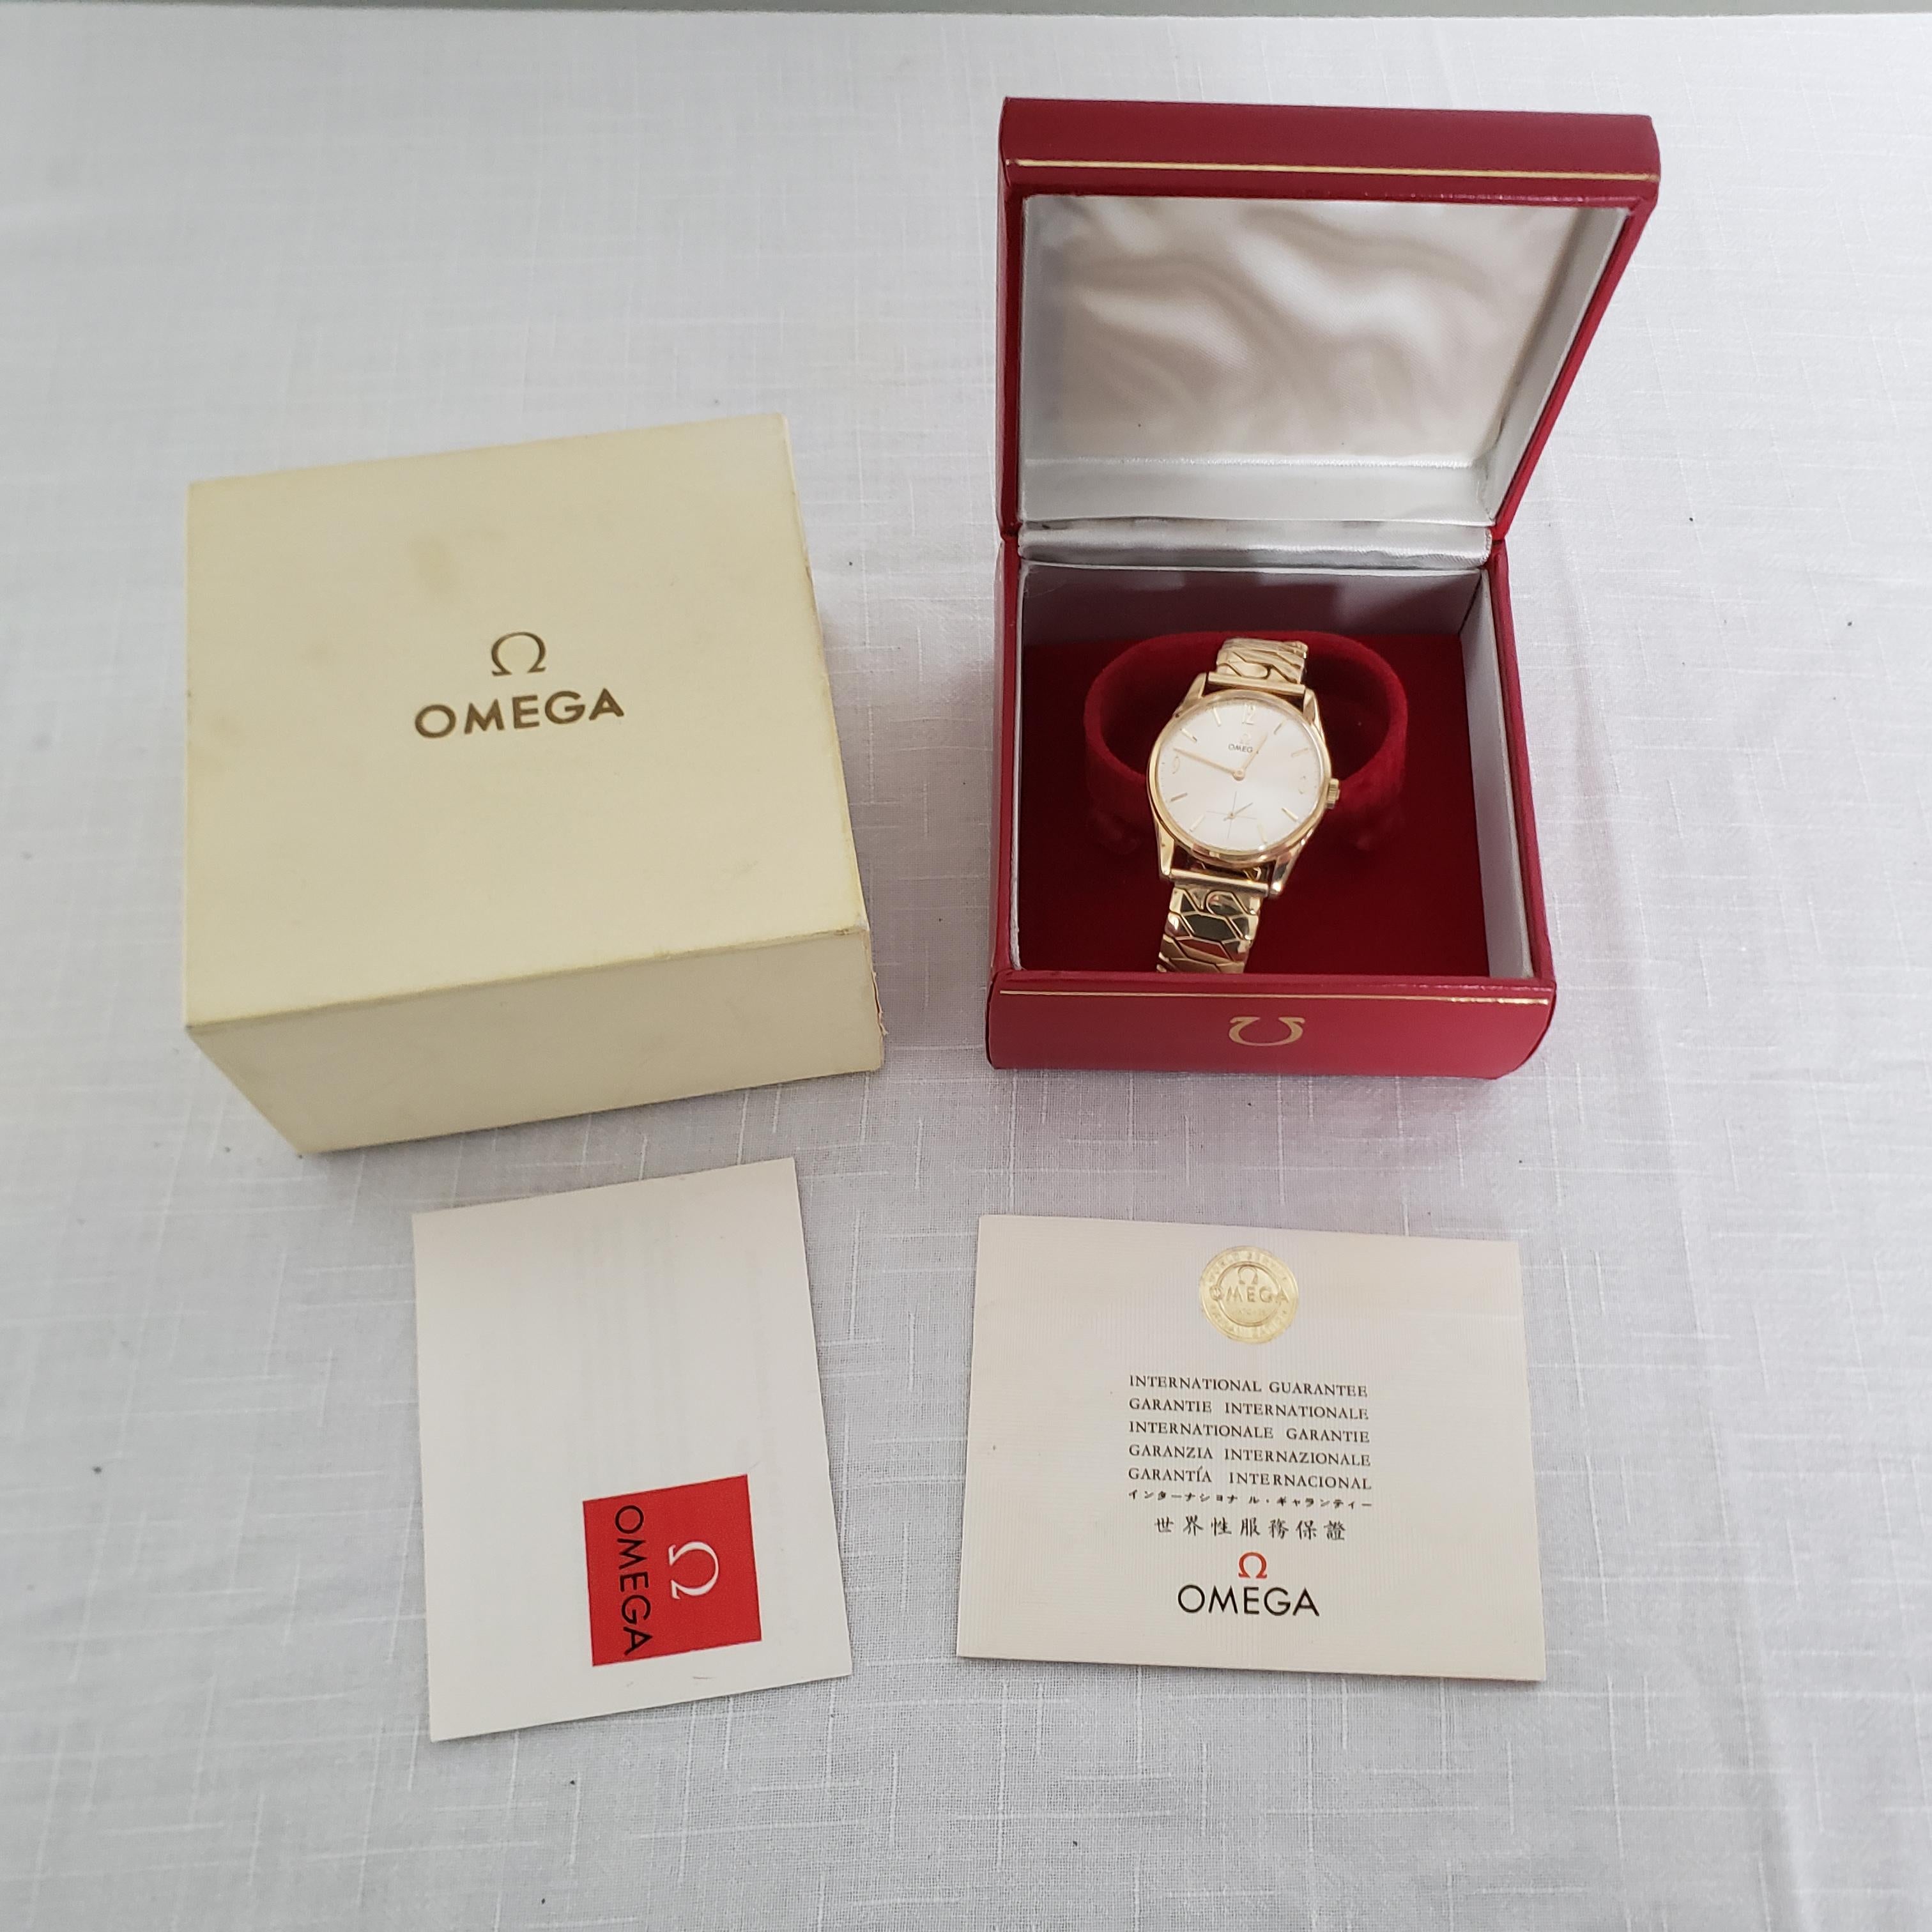 This 9-karat yellow gold men's wristwatch was made by the highly renowned Omega watch company of Switzerland in approximately 1965 in the period Mid-Century Modern style. The watch is in new/old stock condition showing no scratches or significant